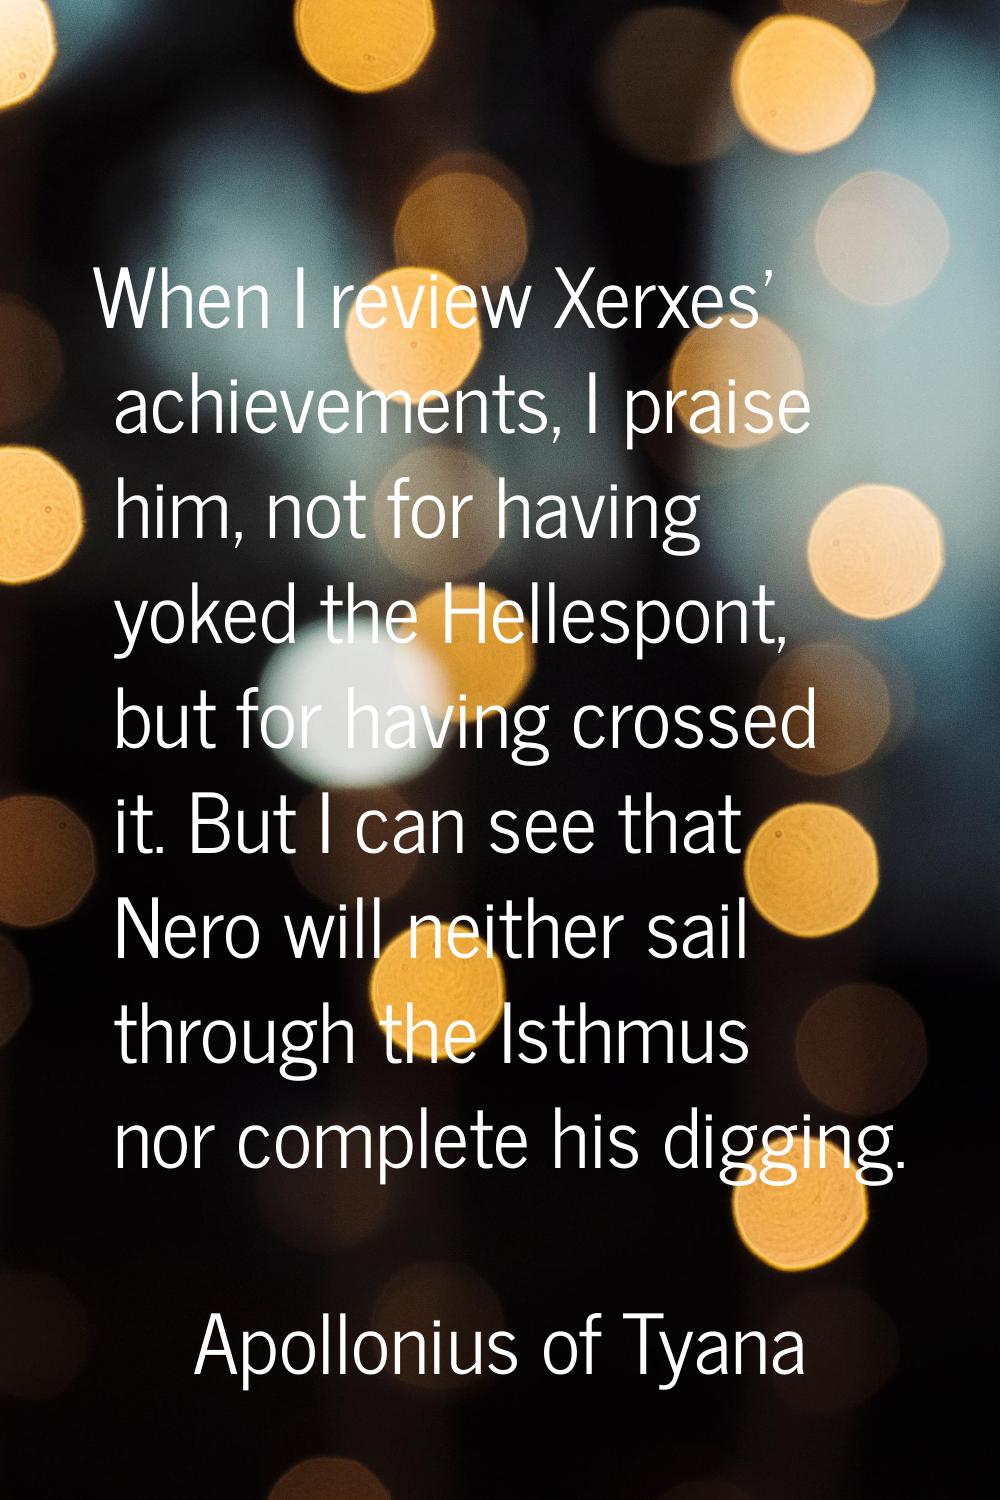 When I review Xerxes' achievements, I praise him, not for having yoked the Hellespont, but for havi